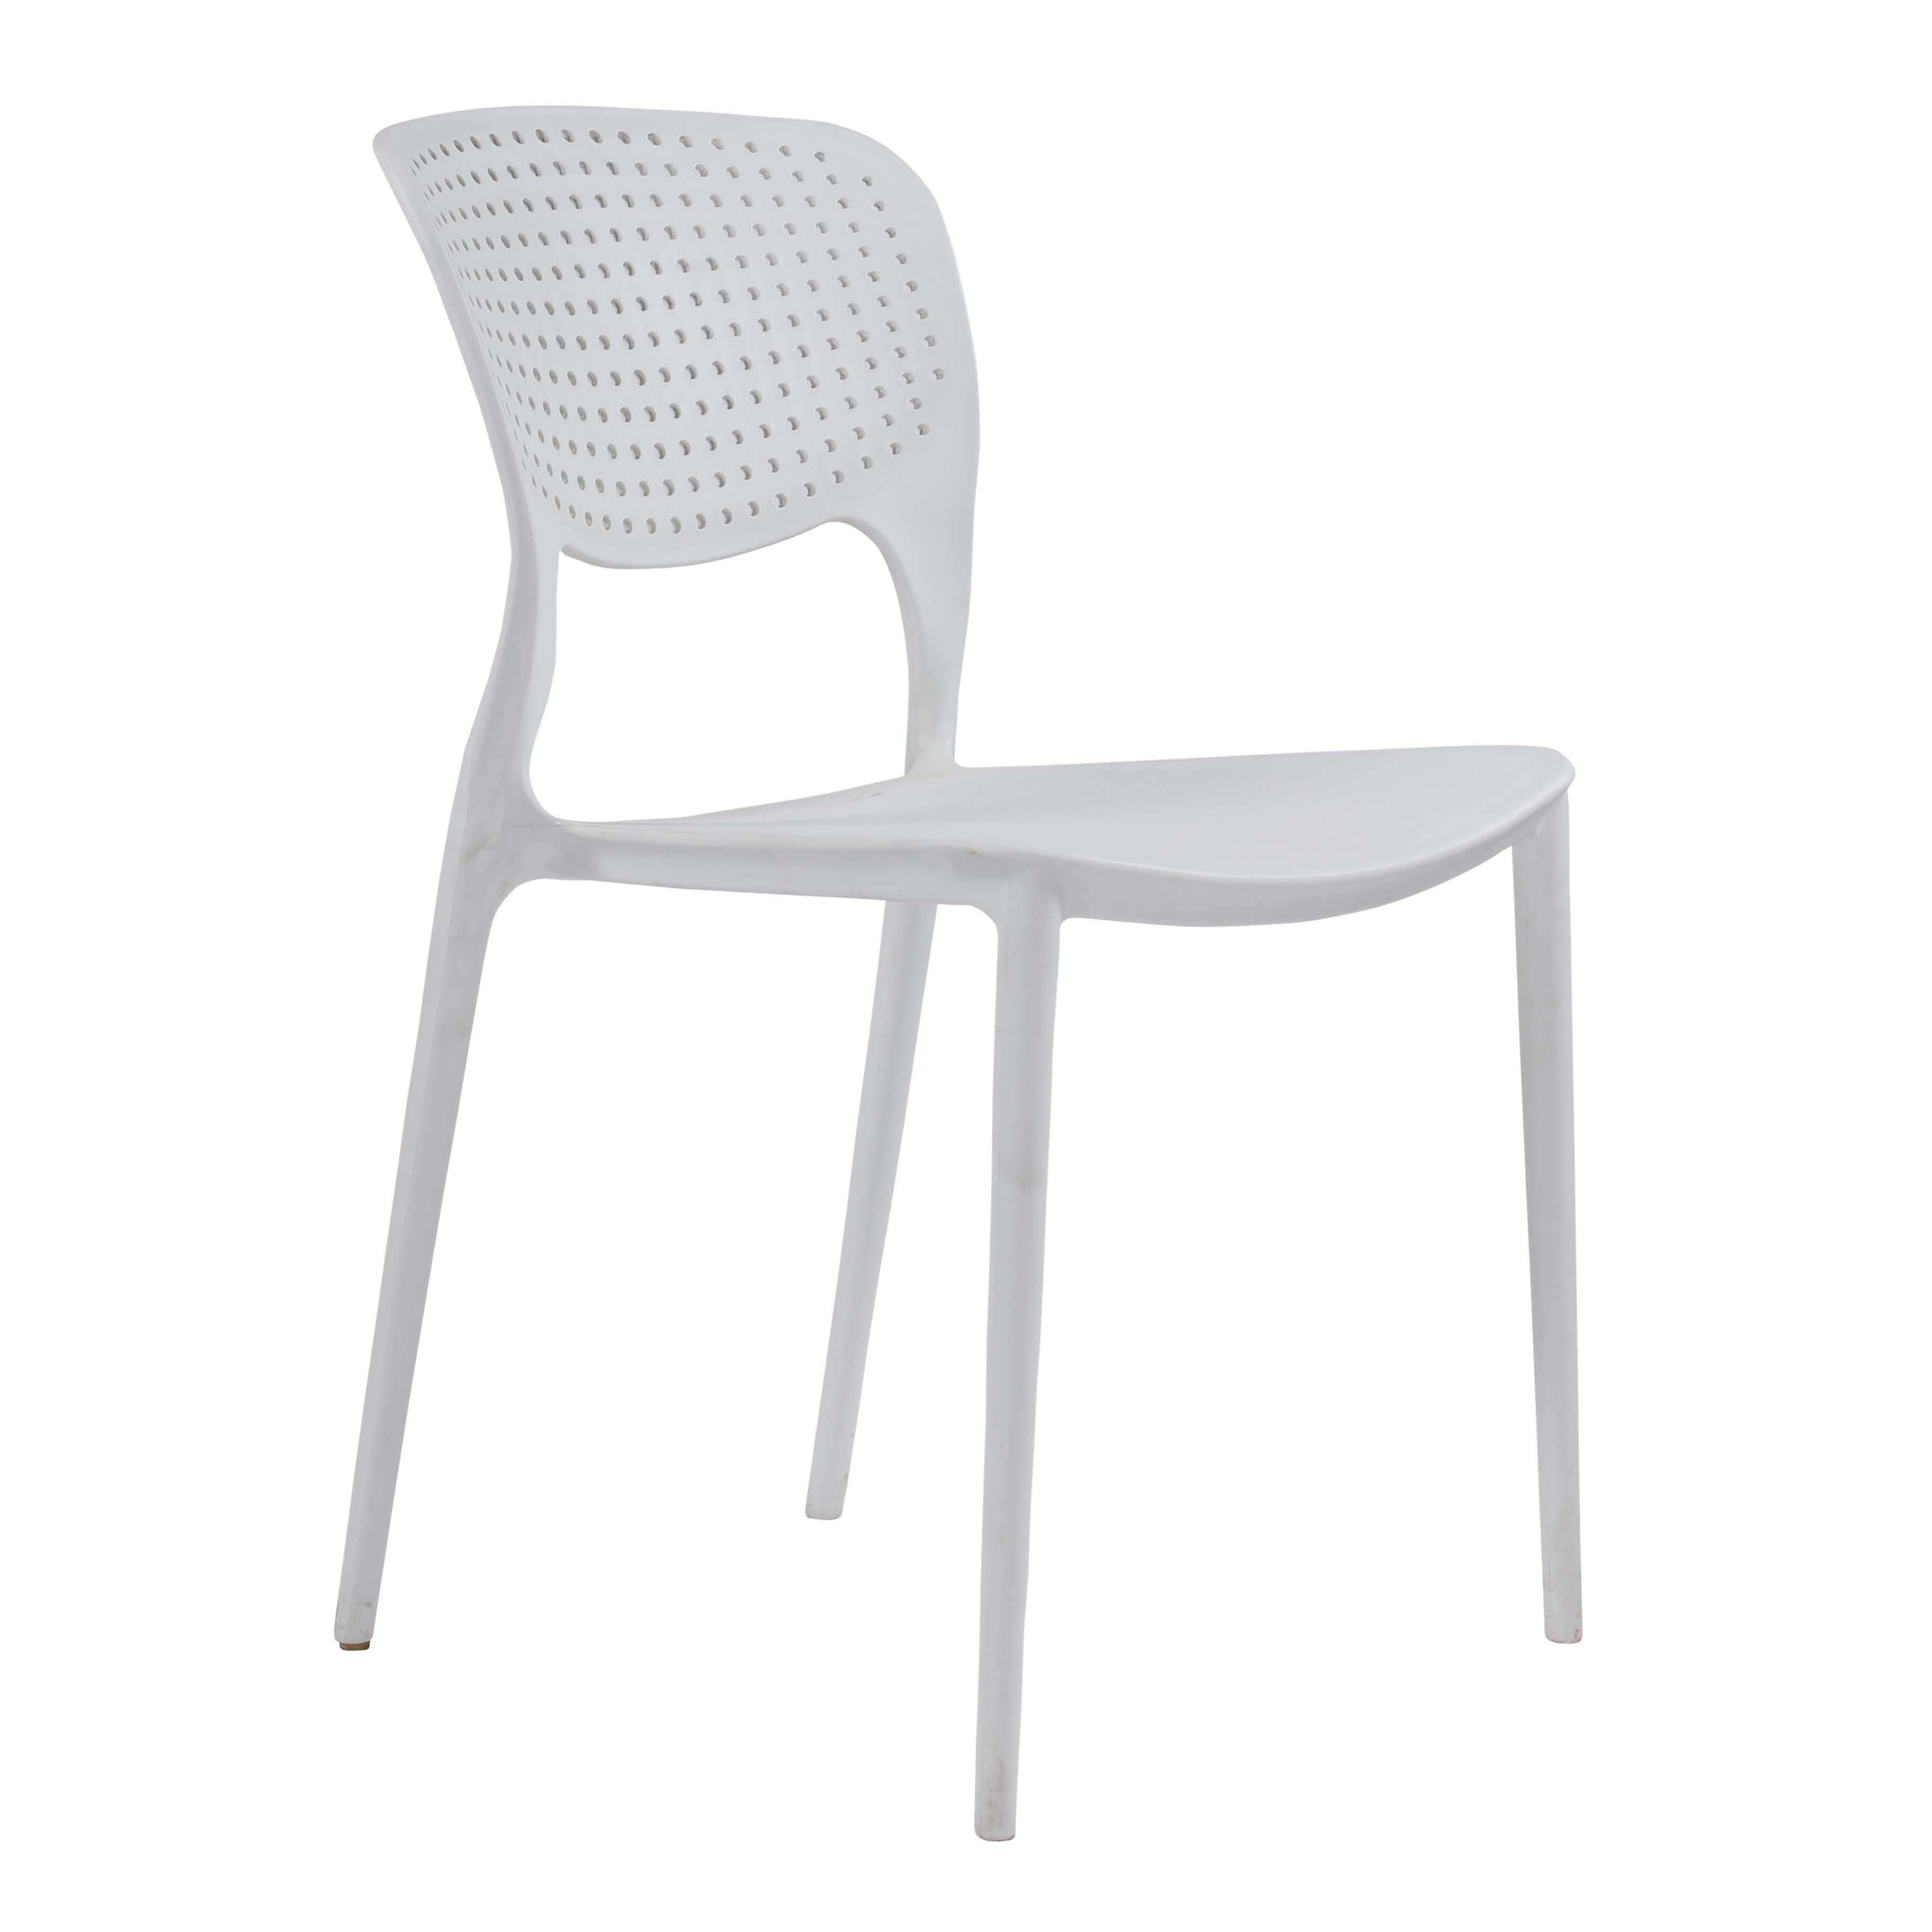 Kent Armless Heavy-Duty Plastic Dining Chair For Outdoor, Cafeteria, Balcony – White